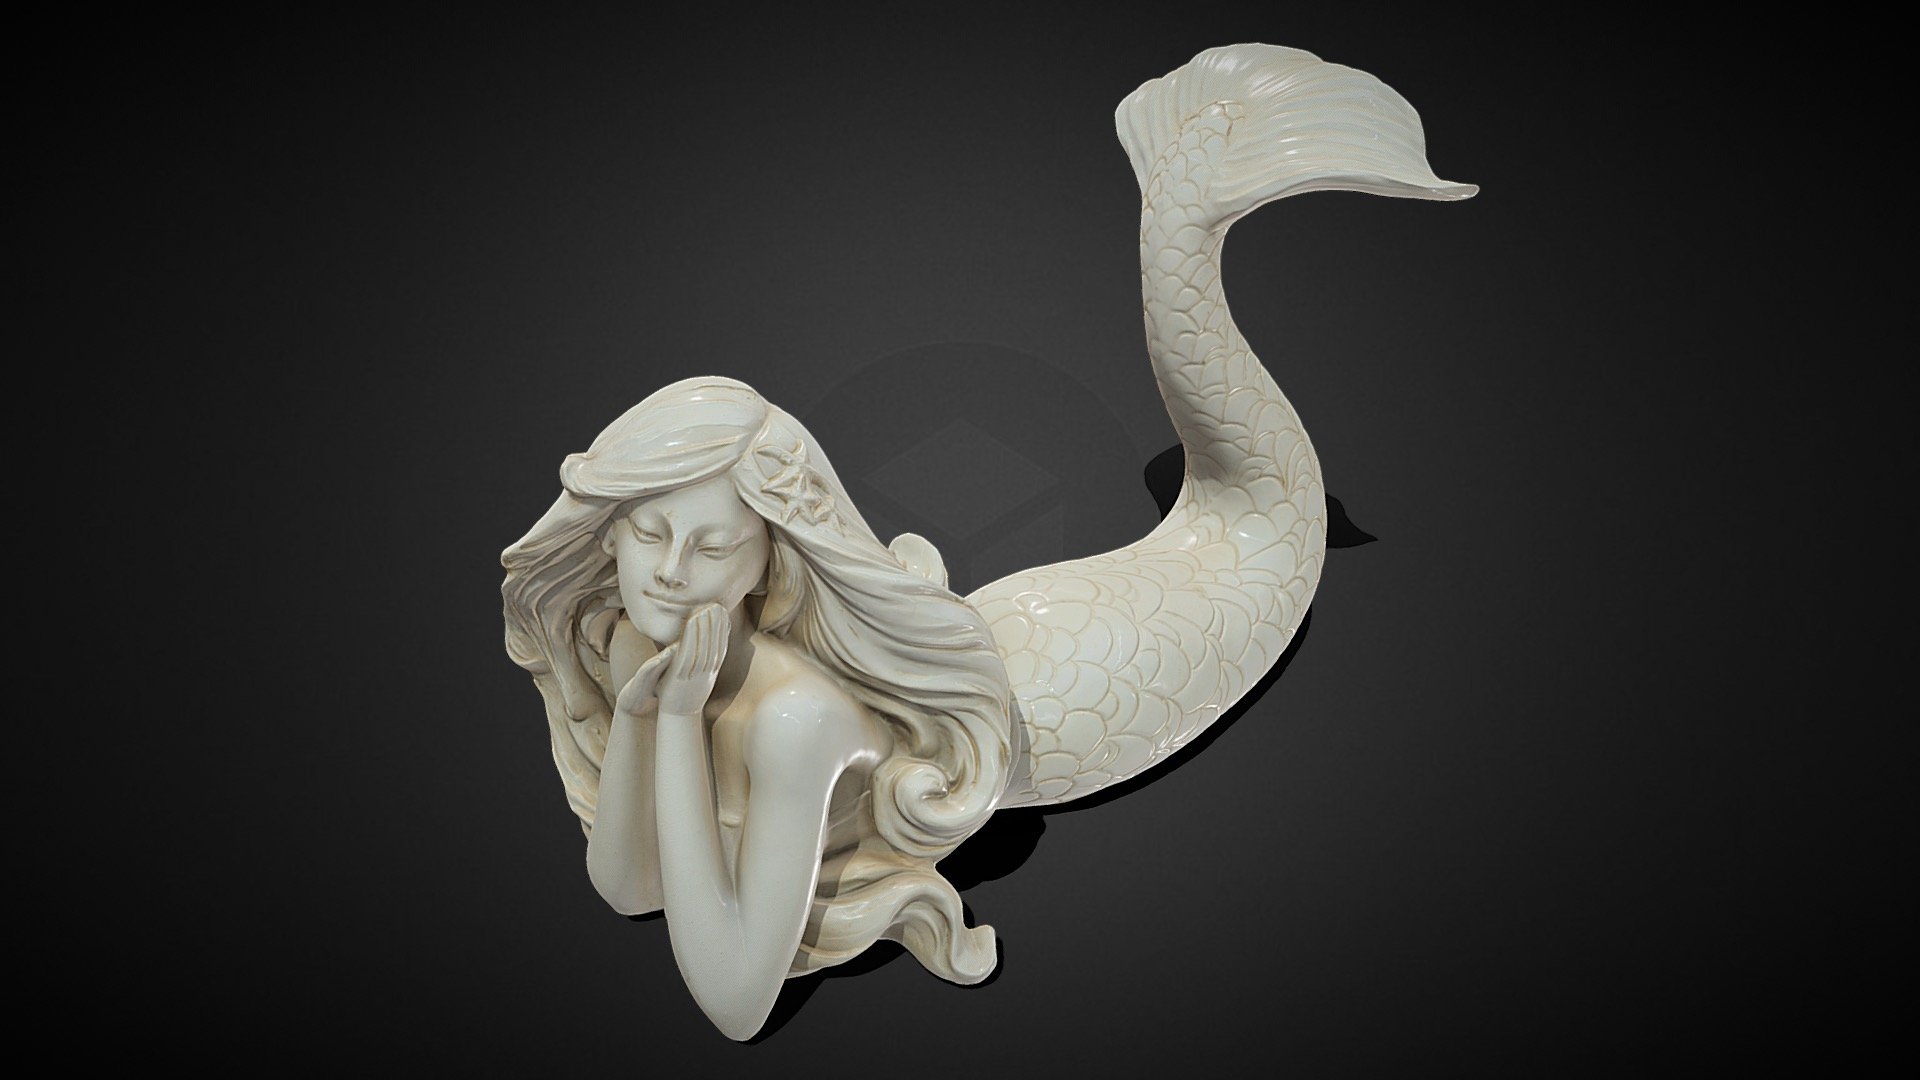 Lounging Mermaid. Photogrammetry. 3D model made in Agisoft Metashap using 636 images. Additional processing completed in Geomagic Wrap, InstantMeshes, Blender, Substance Designer, and Photoshop 3d model